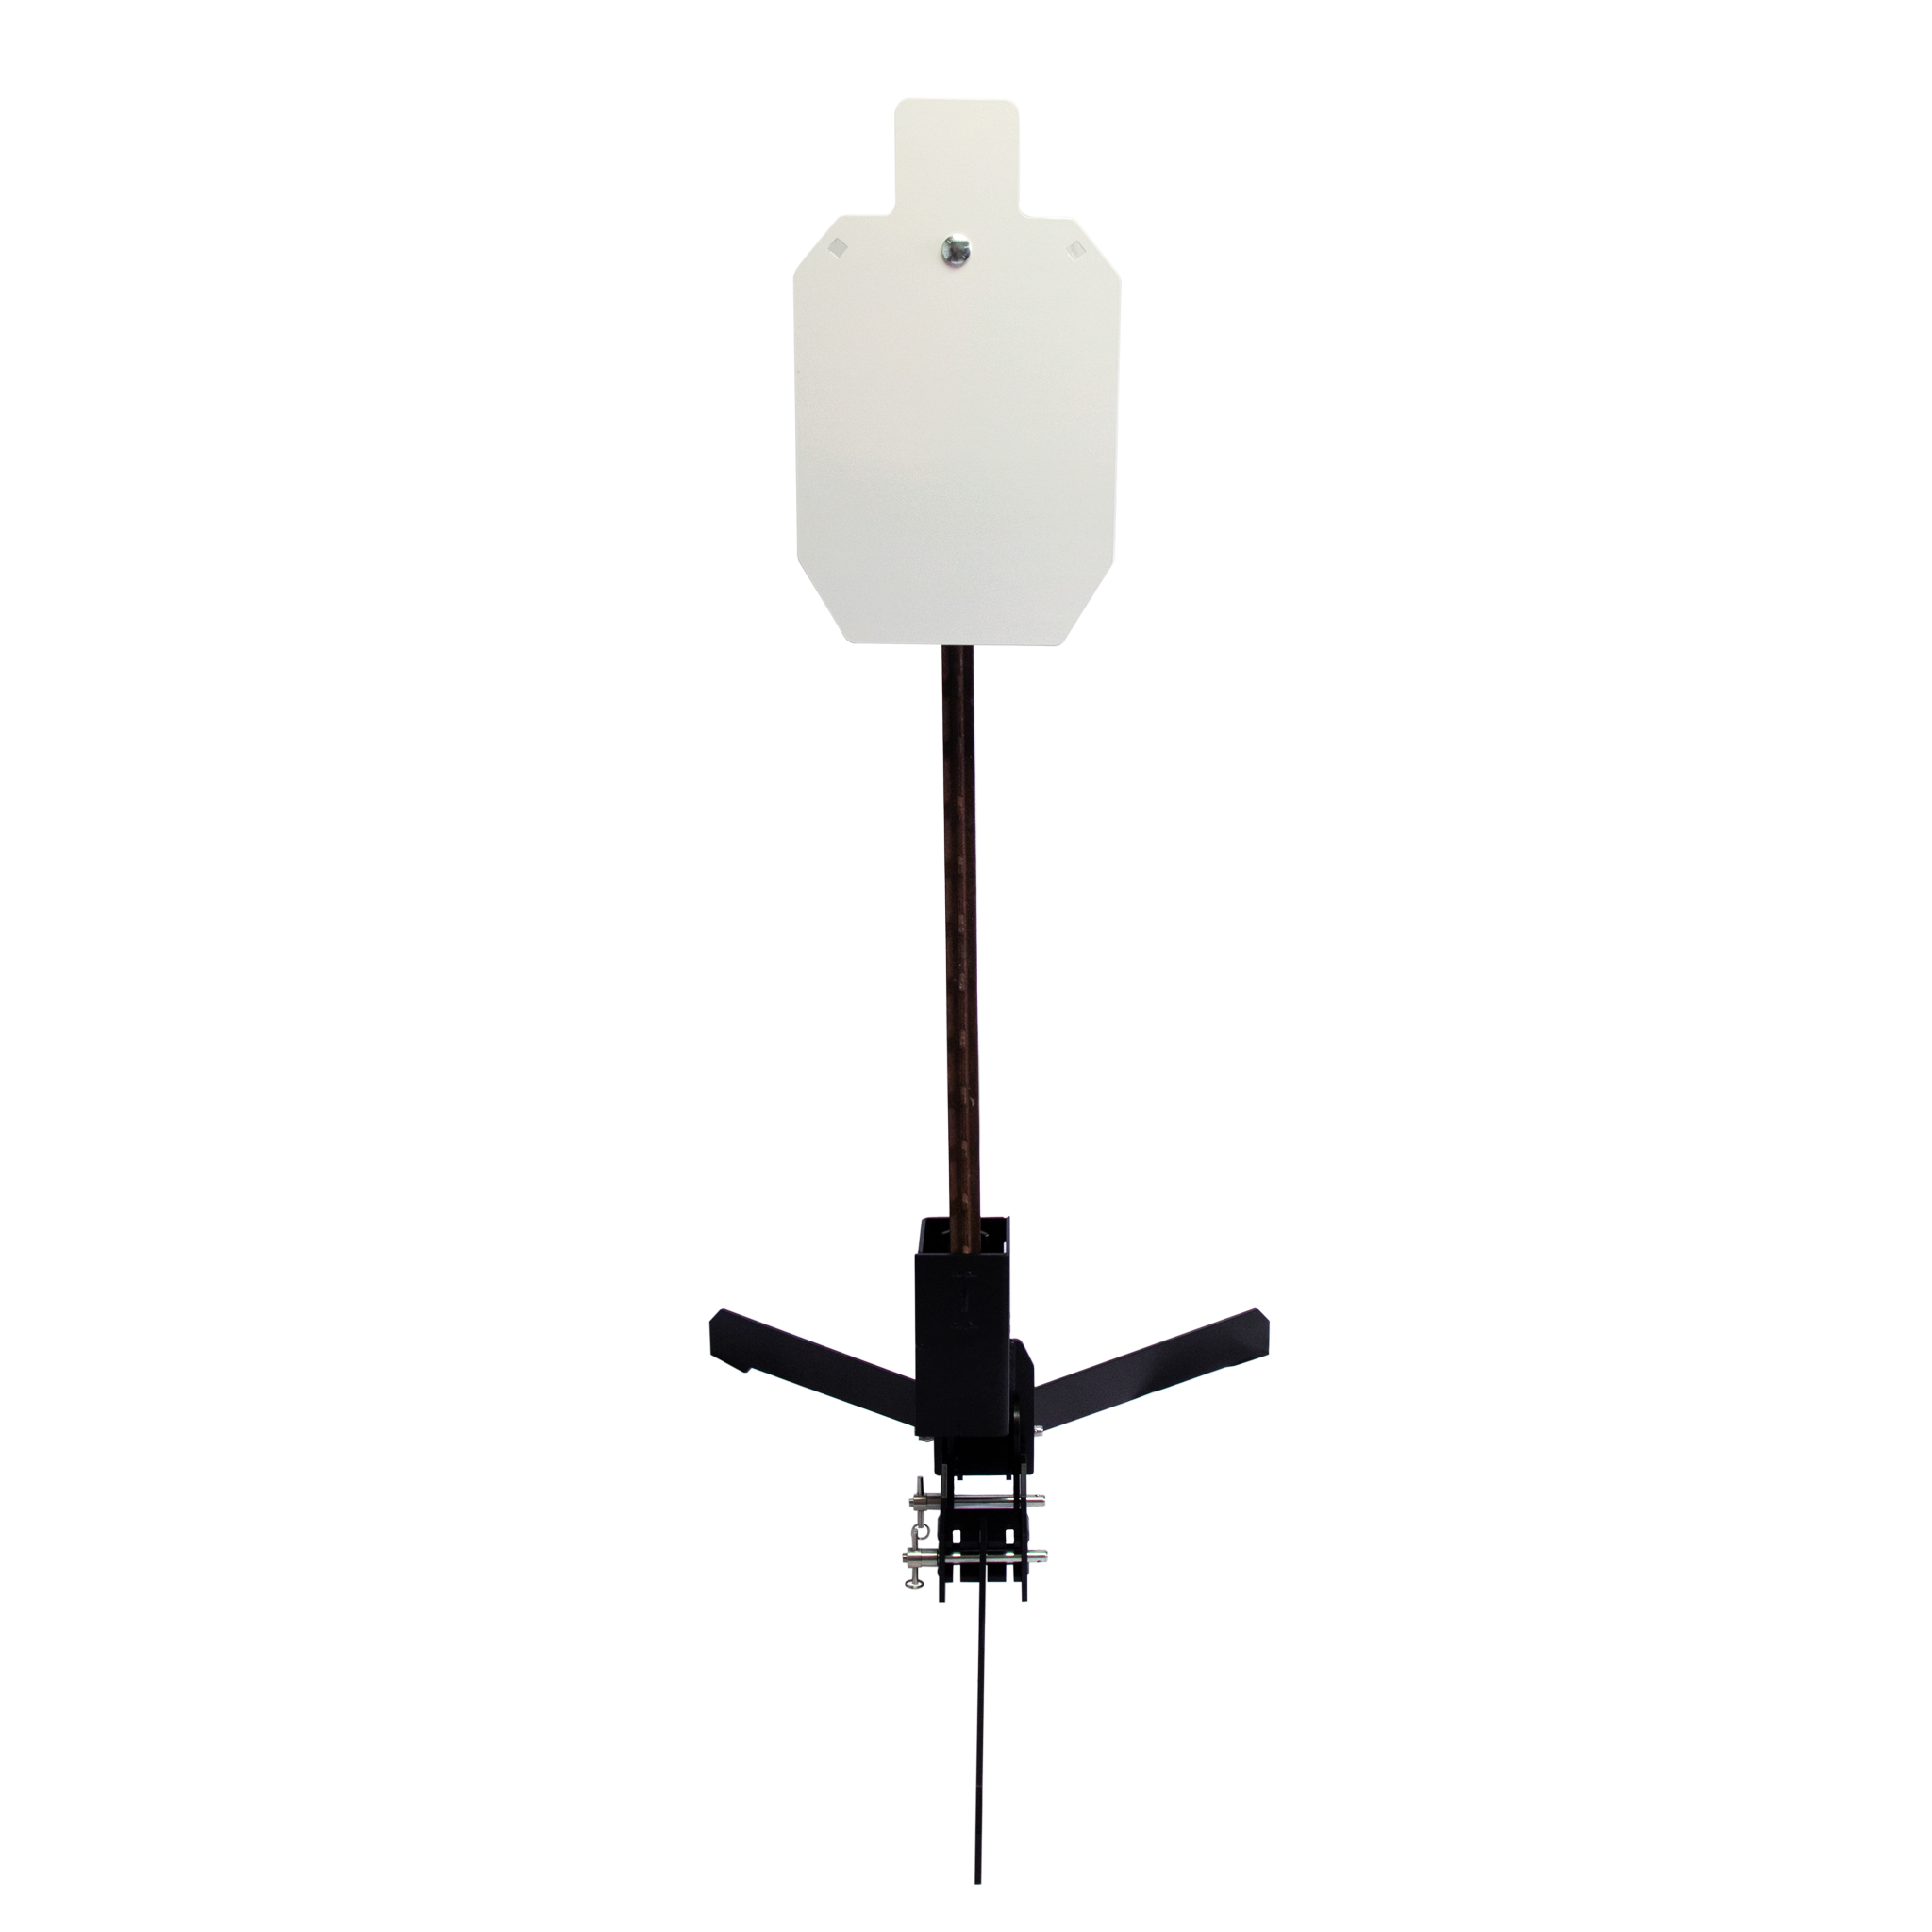 Adjustable T-Post Steel Target Stand | Double Tap Ind.